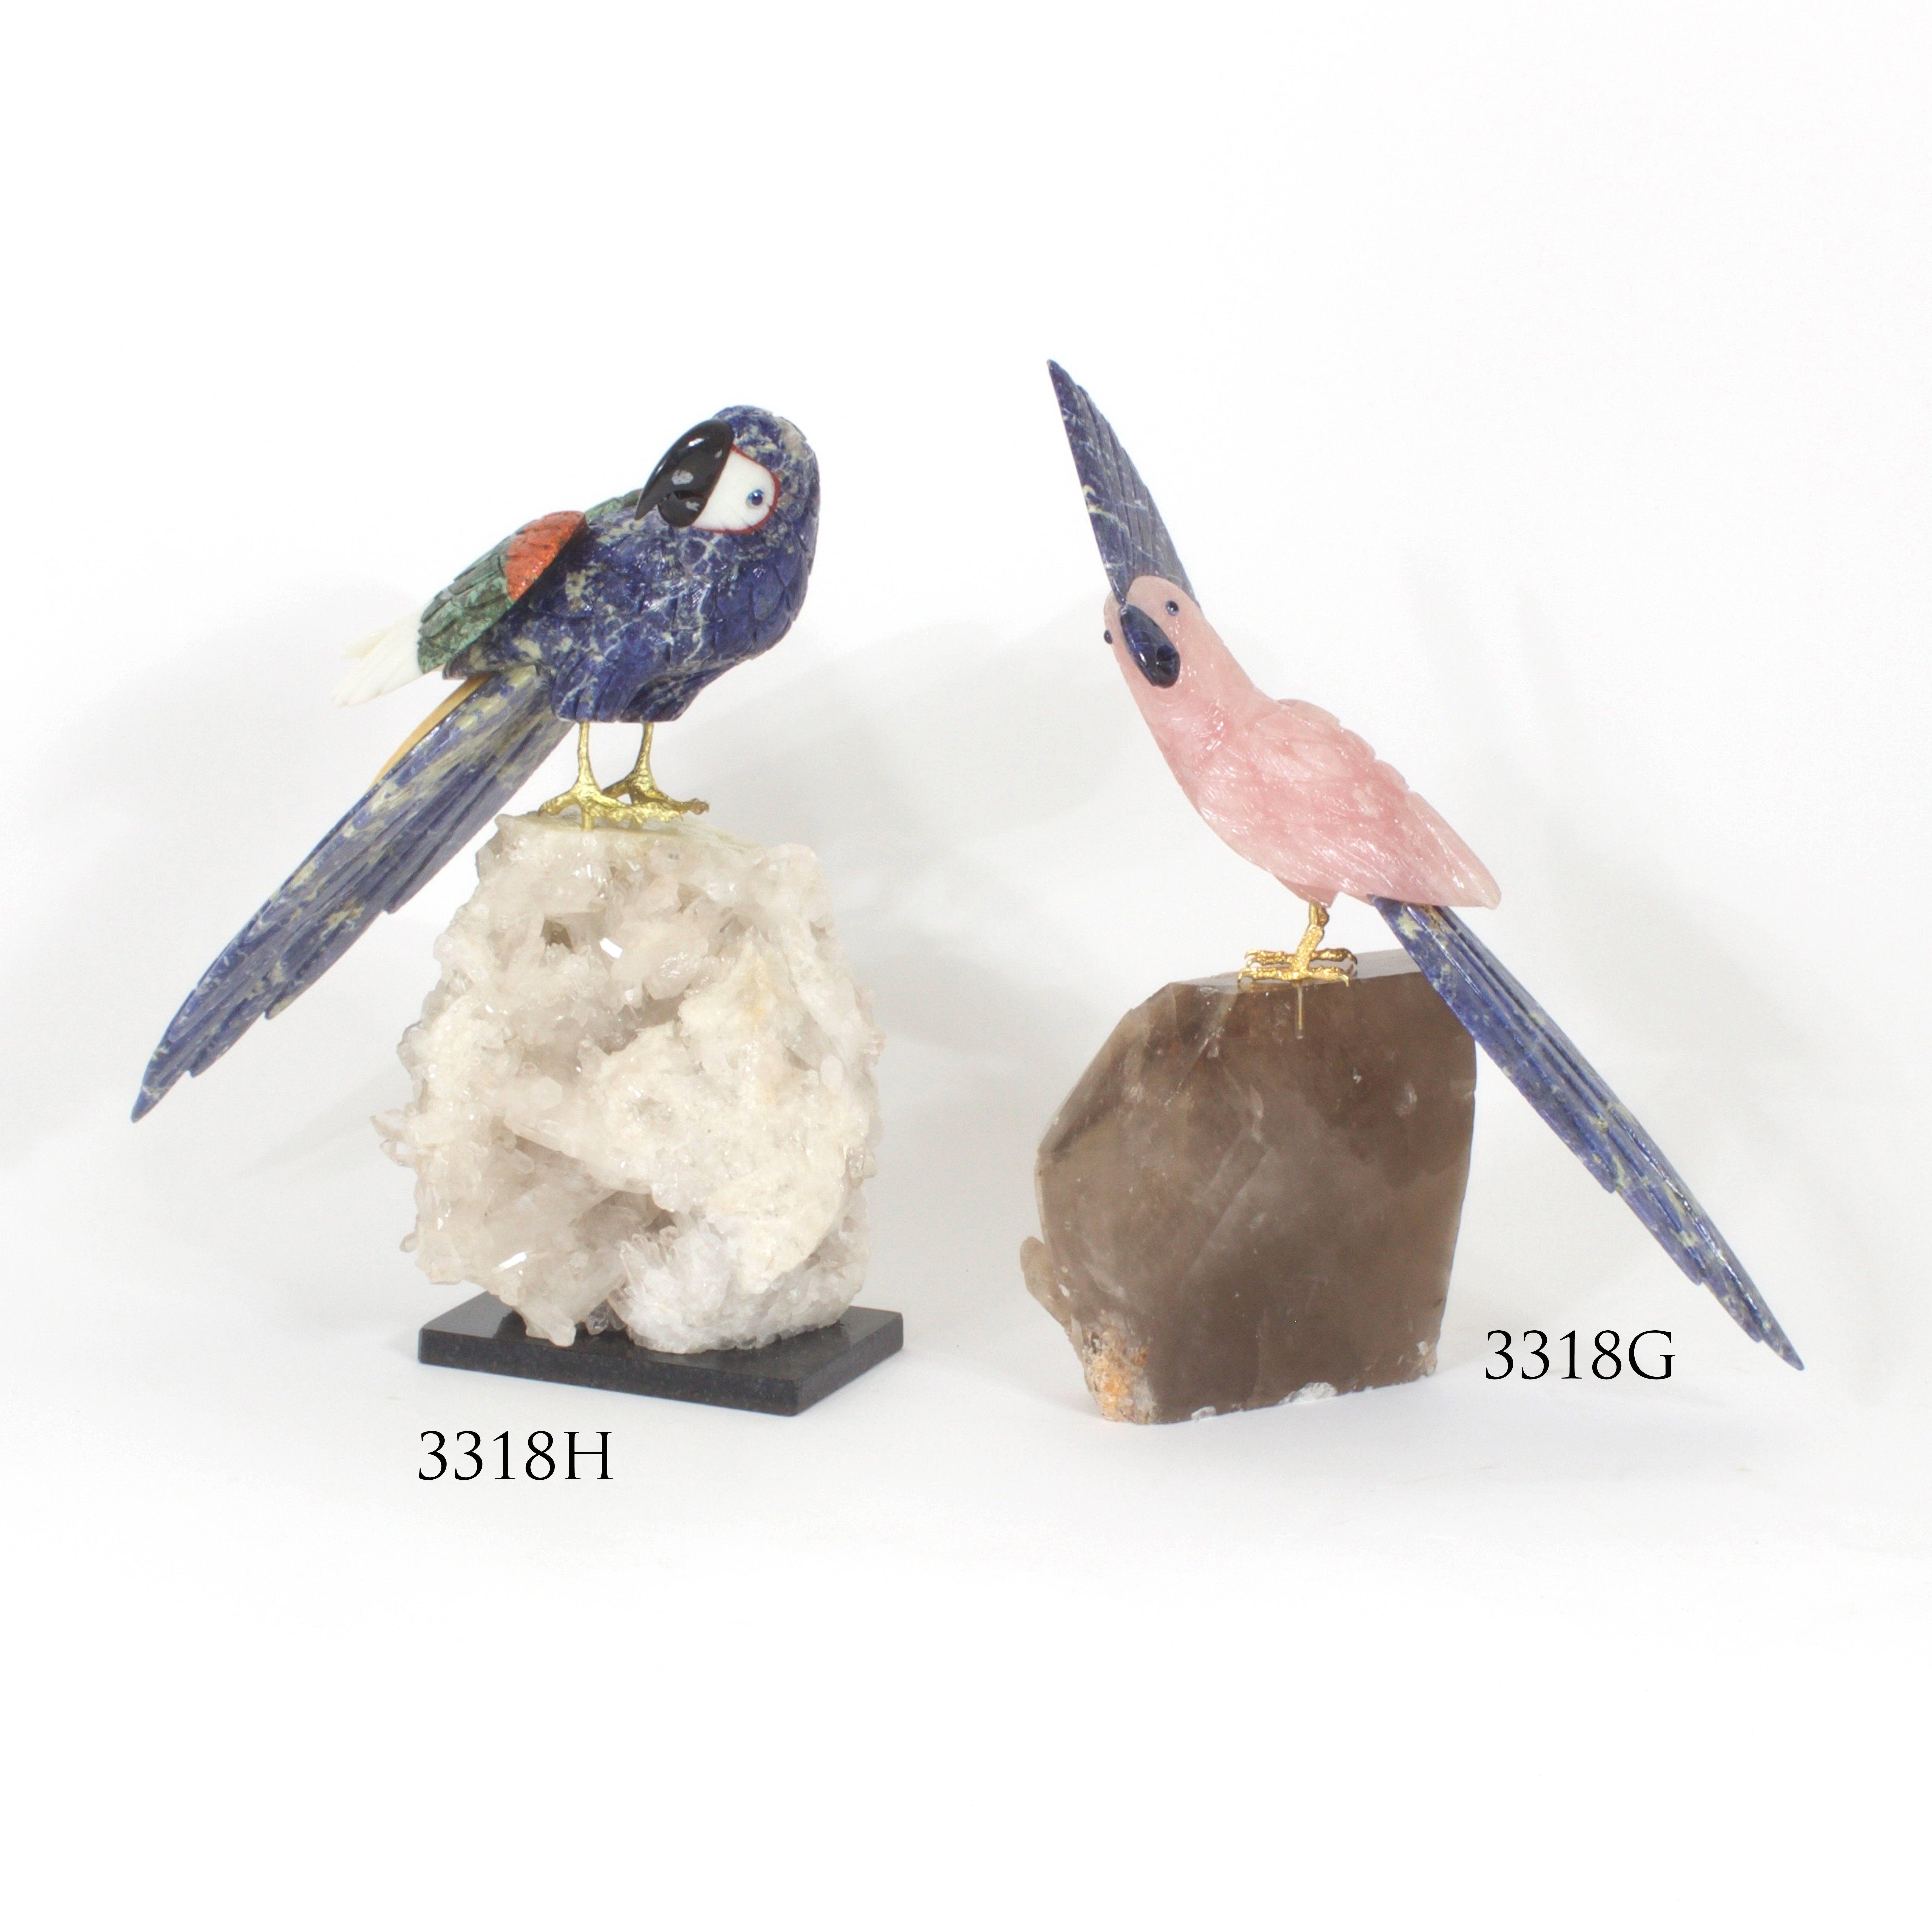 Here are two impressive, expertly carved stone birds with curious expressions and brass feet presented on Quartz geode specimens. The parrot on the left is composed mostly of blue and green Sodalite. 
Individually priced.
Measures: 3318H $3,450.00